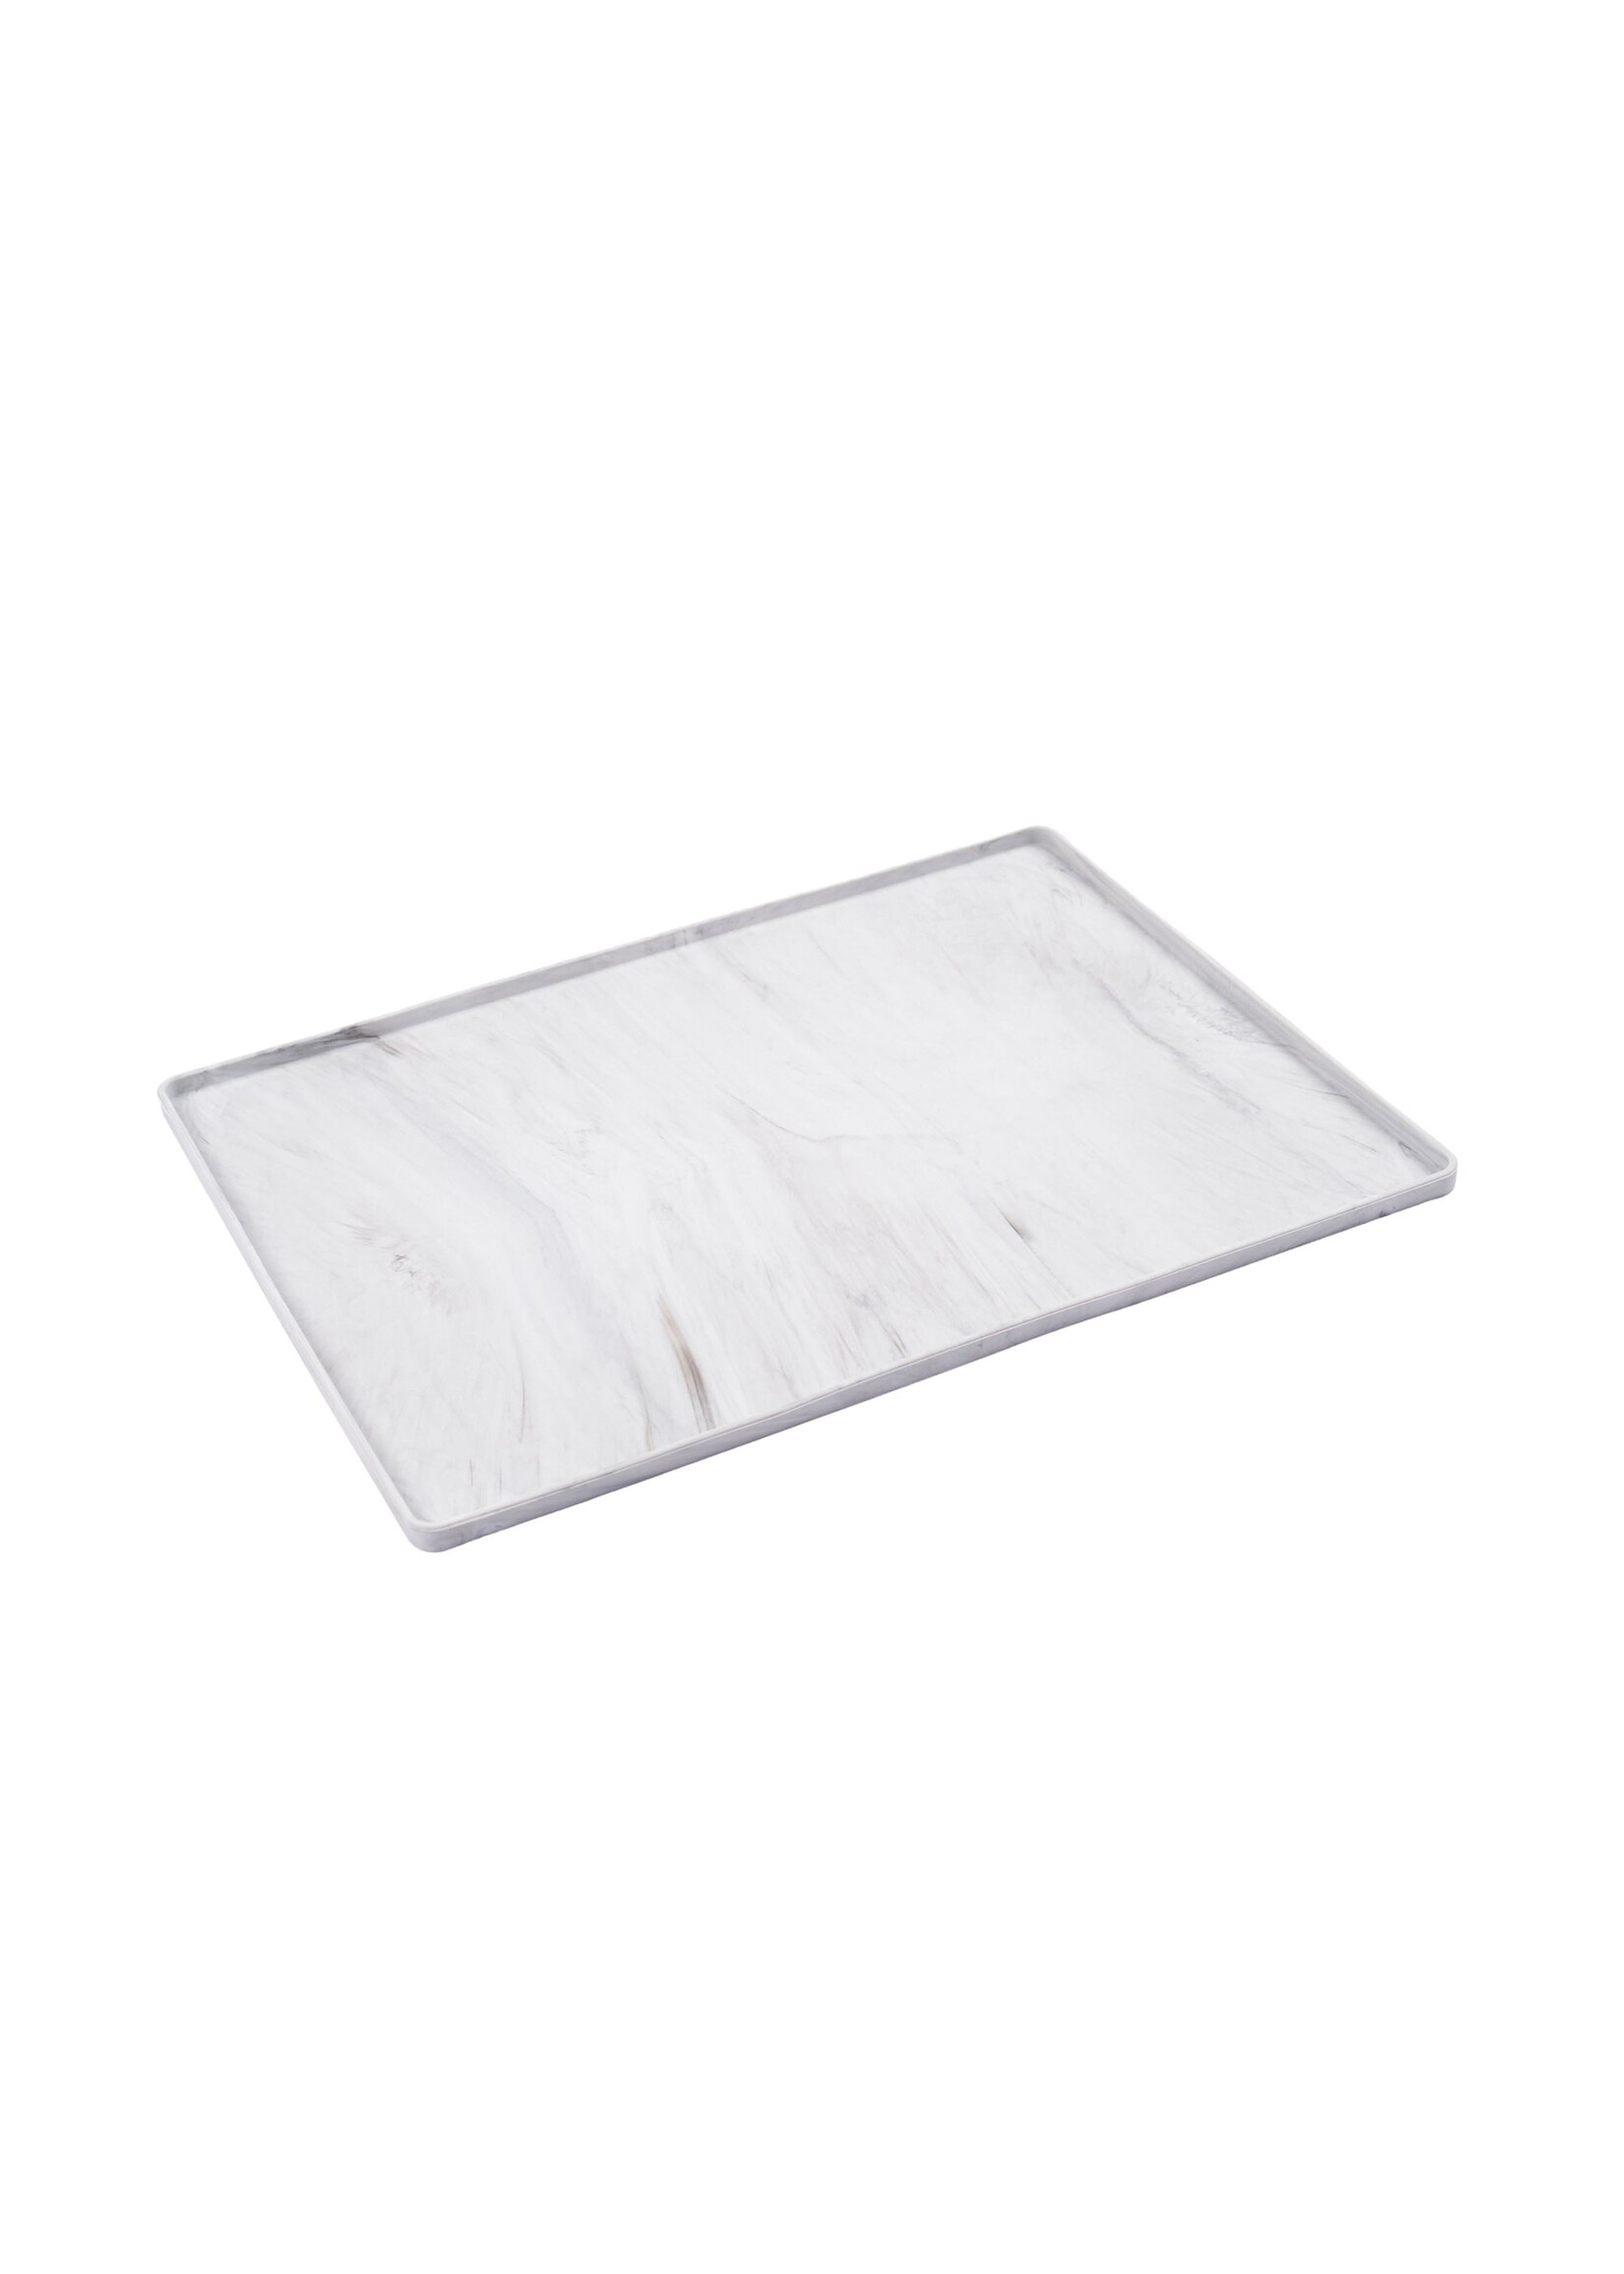 Messy Mutts Messy Mutts Silicone Bowl Mat with Raised Edge